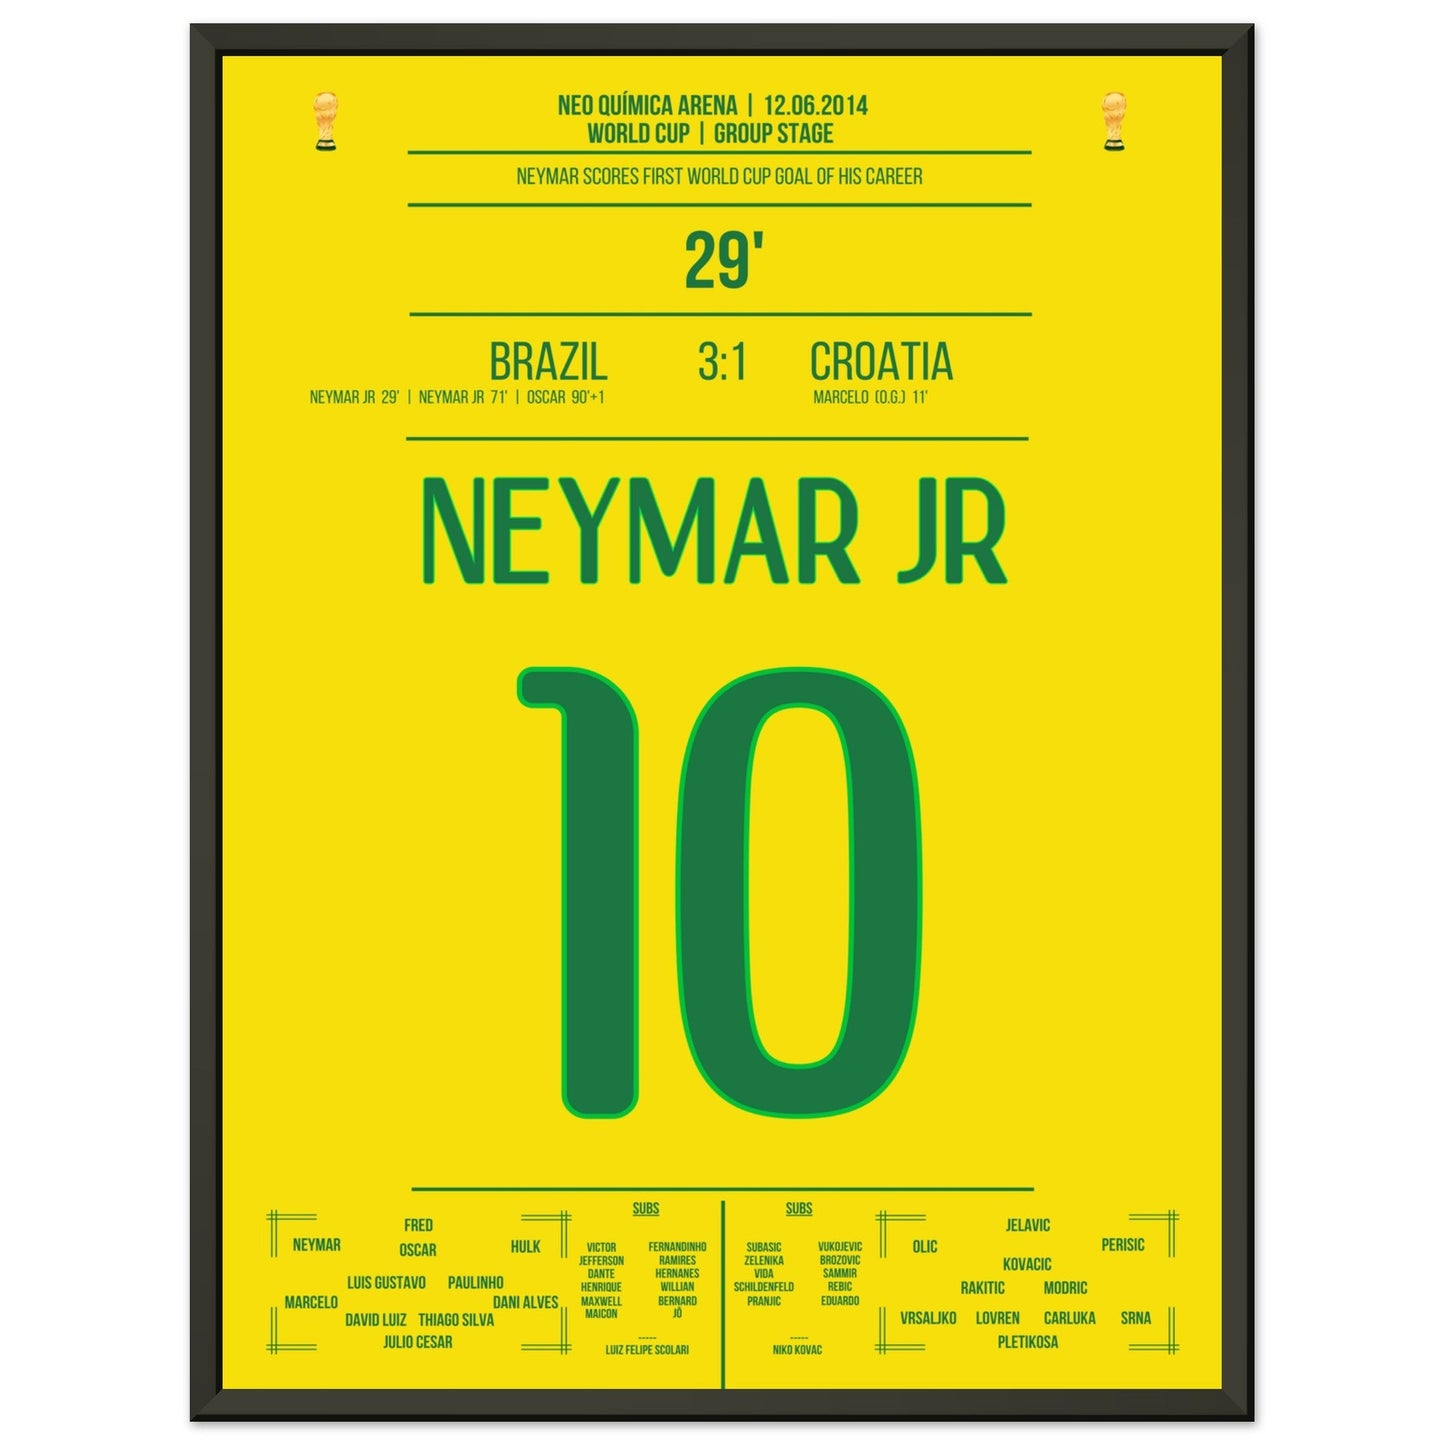 Neymar scores his first goal at a World Cup in 2014